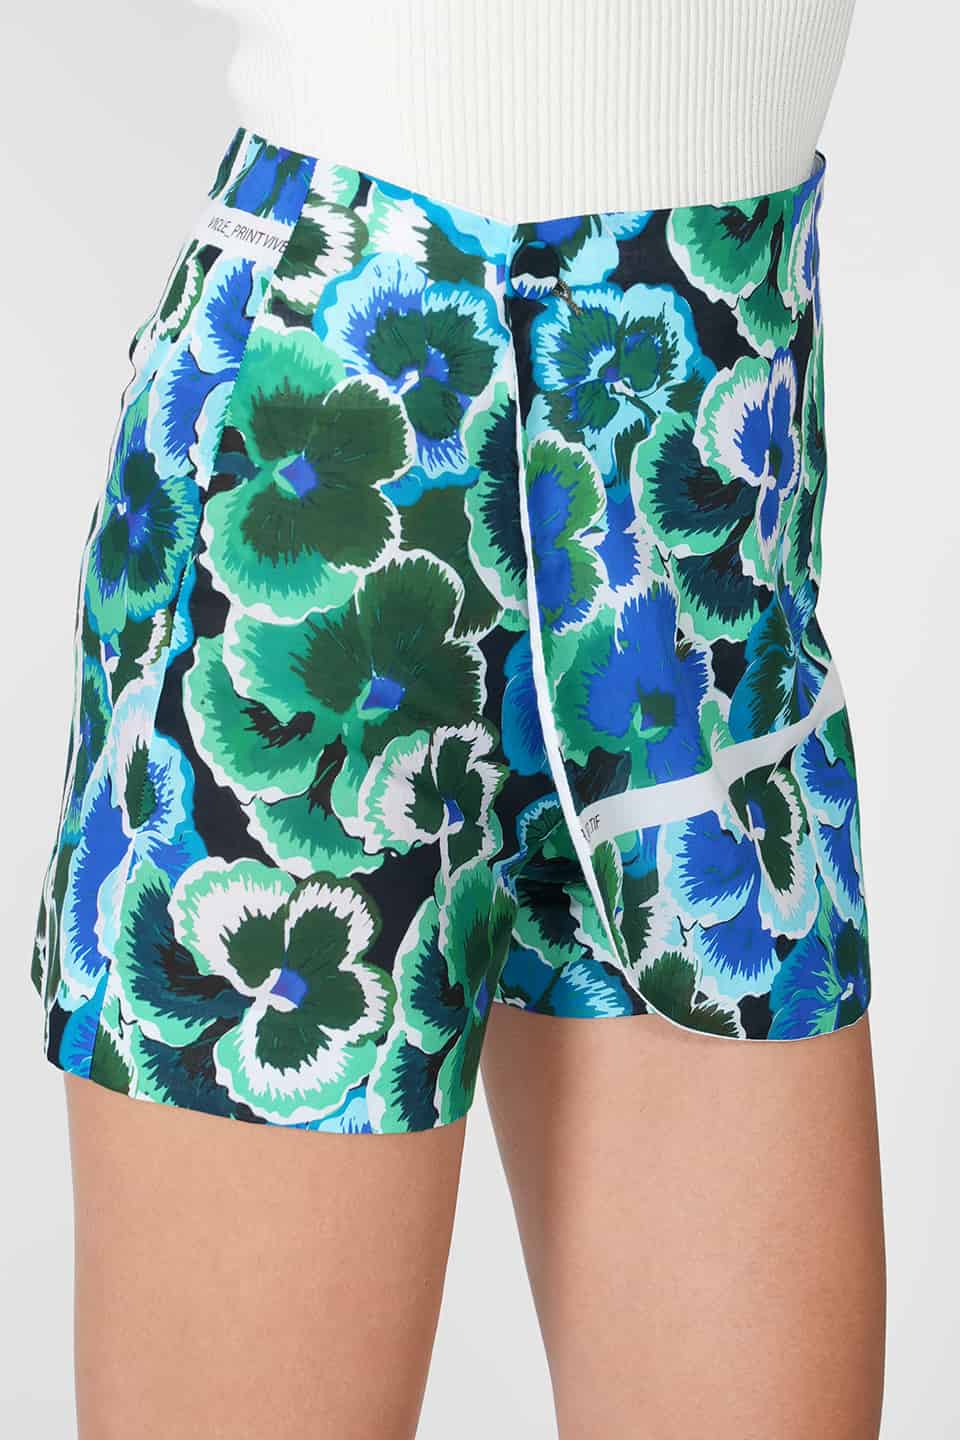 Thumbnail for Product gallery 4, Linen Shorts Blue/Green